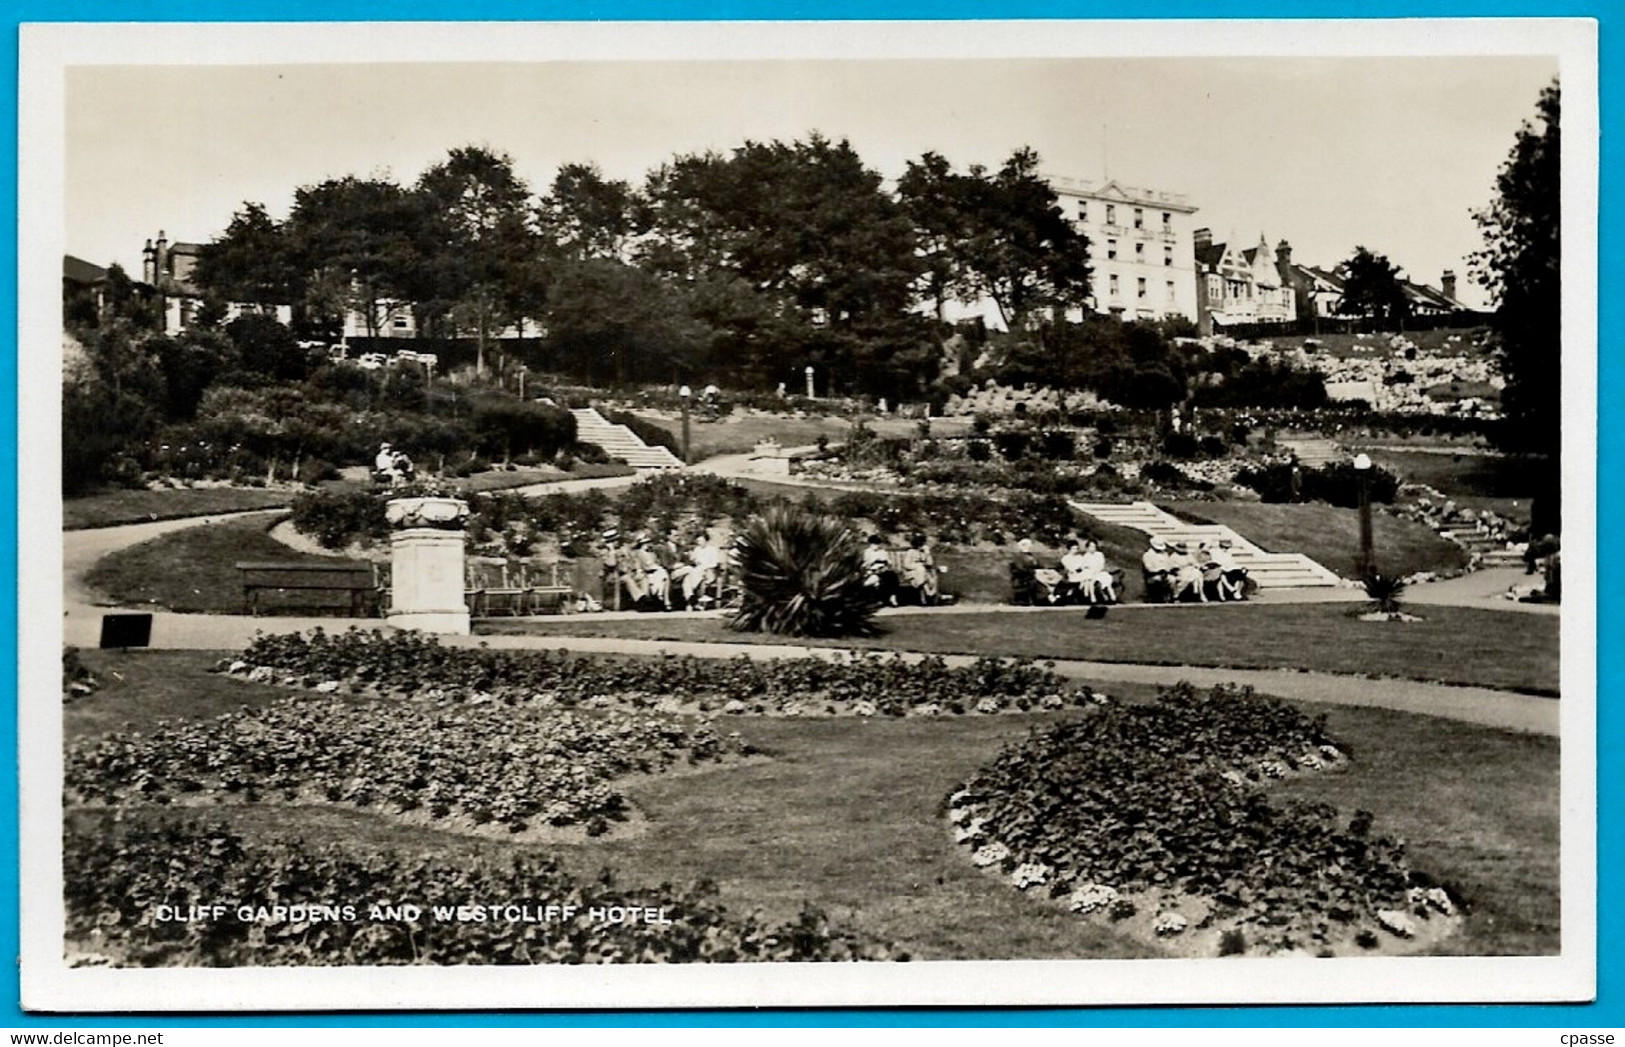 CPA Post Card UK Essex WESTCLIFF-on-SEA - Cliff Gardens And Westcliff Hotel - Southend, Westcliff & Leigh